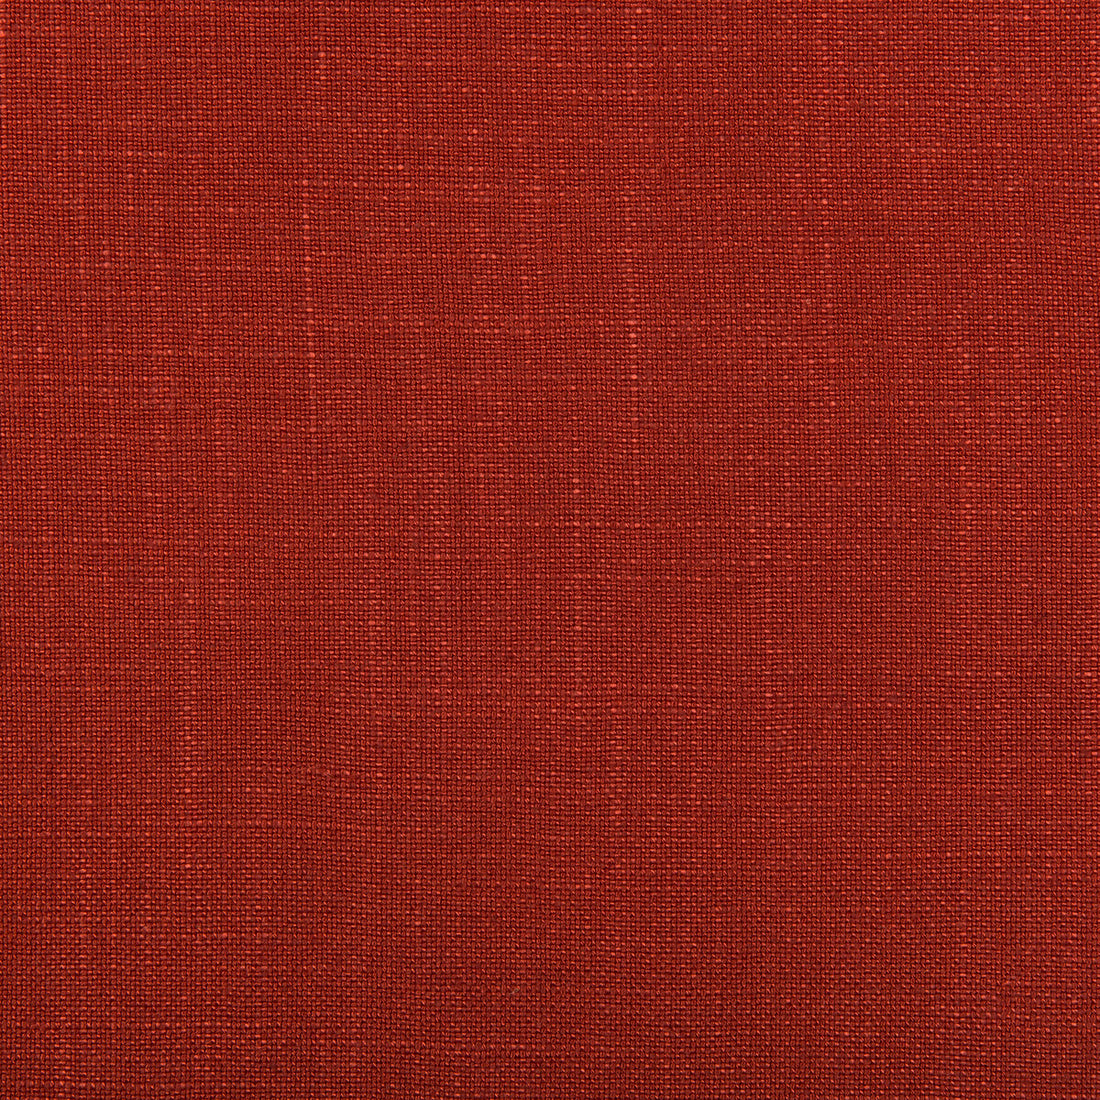 Aura fabric in fire color - pattern 35520.19.0 - by Kravet Design